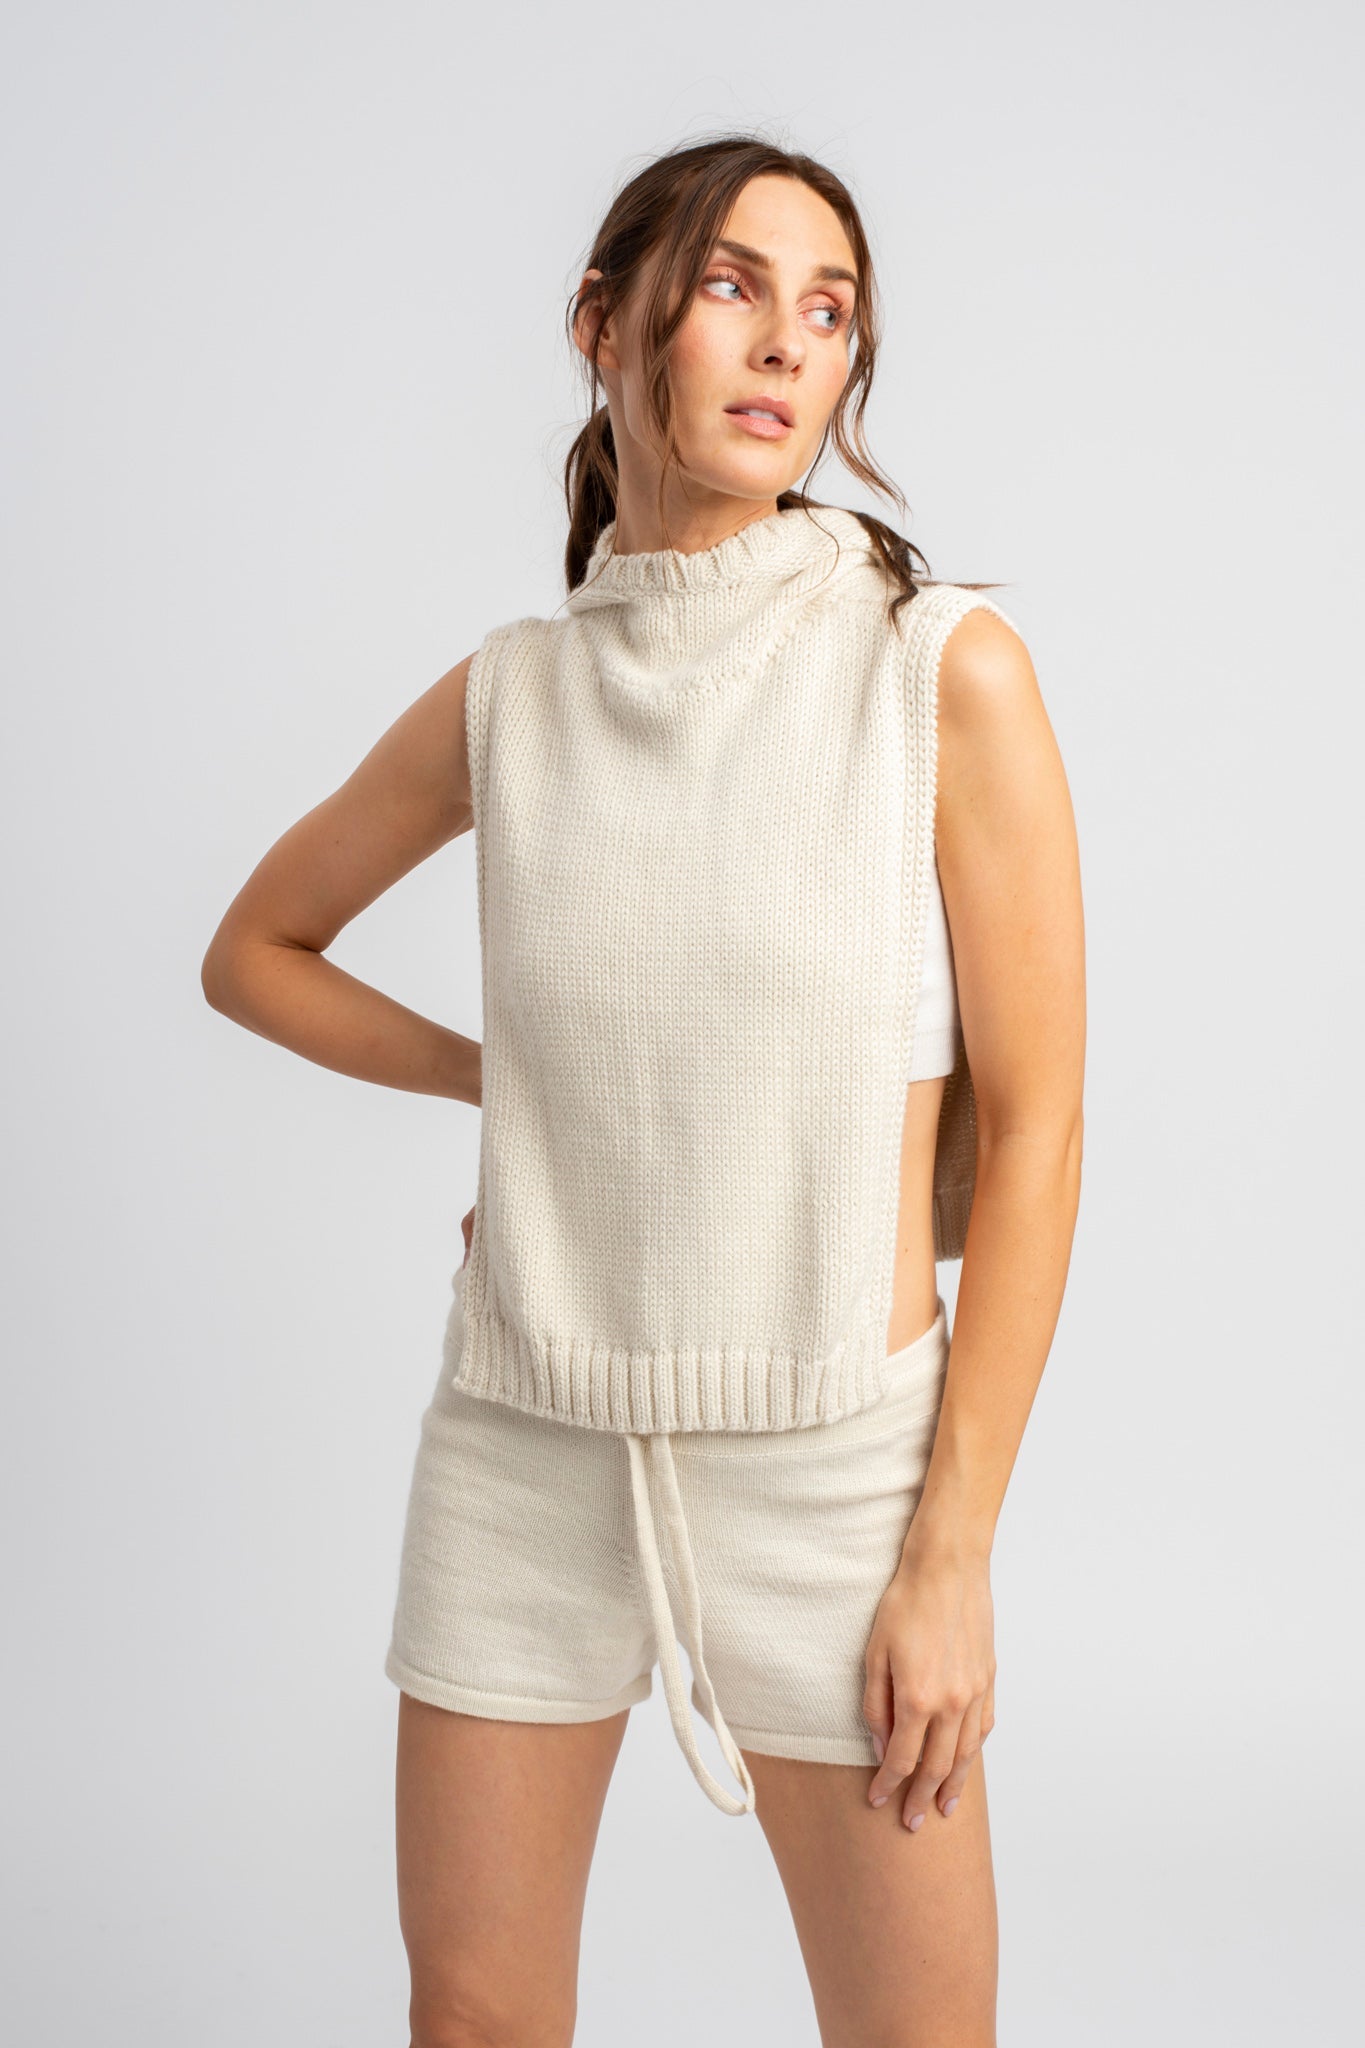 The Alpaca Knit Shorts in White